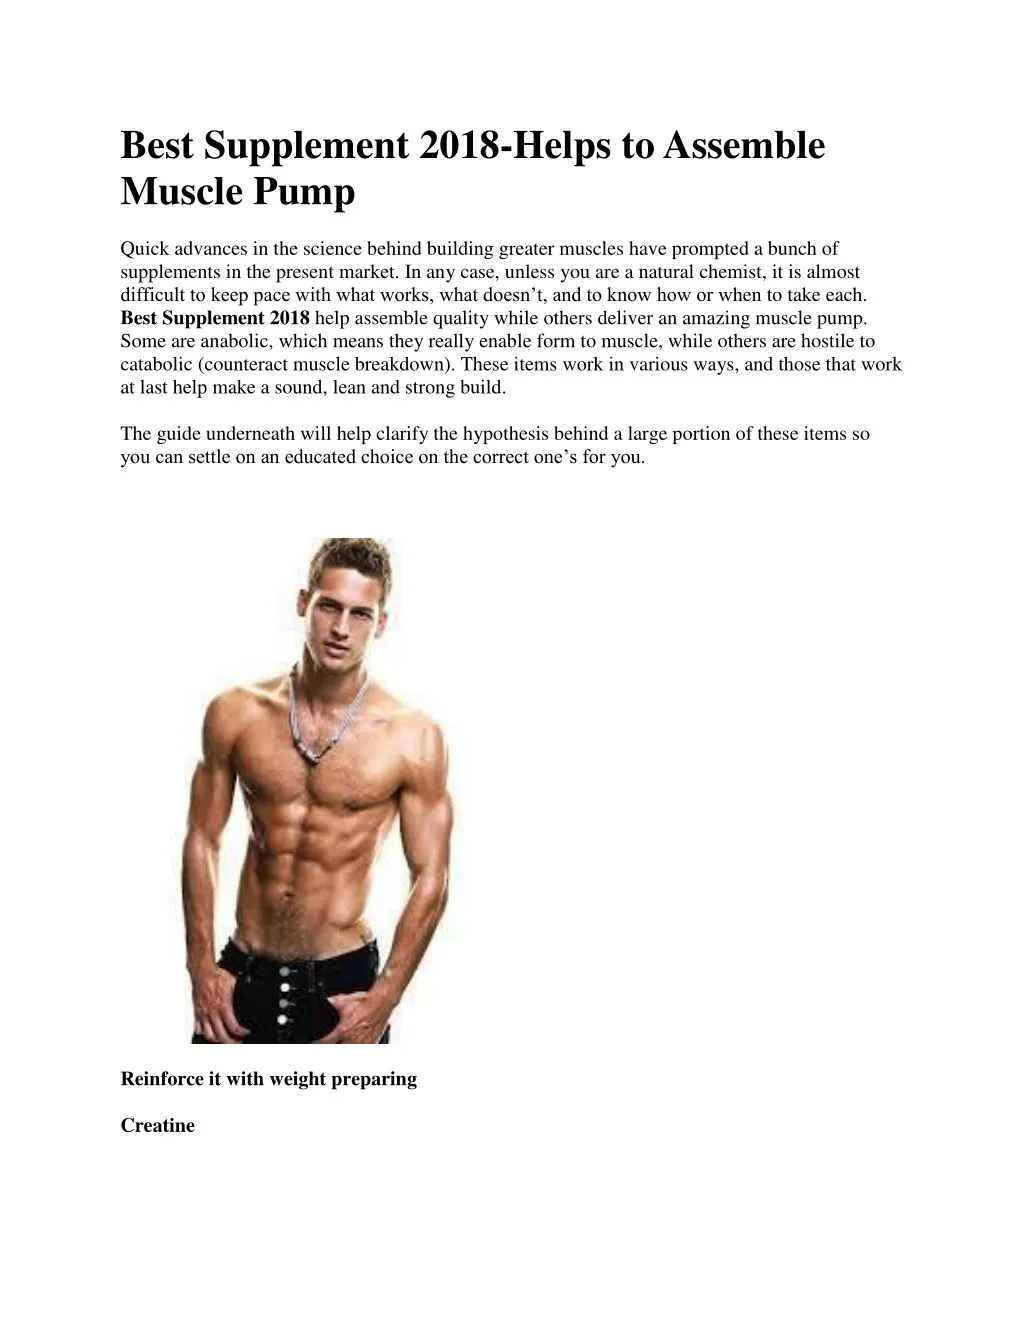 best supplement 2018 helps to assemble muscle pump